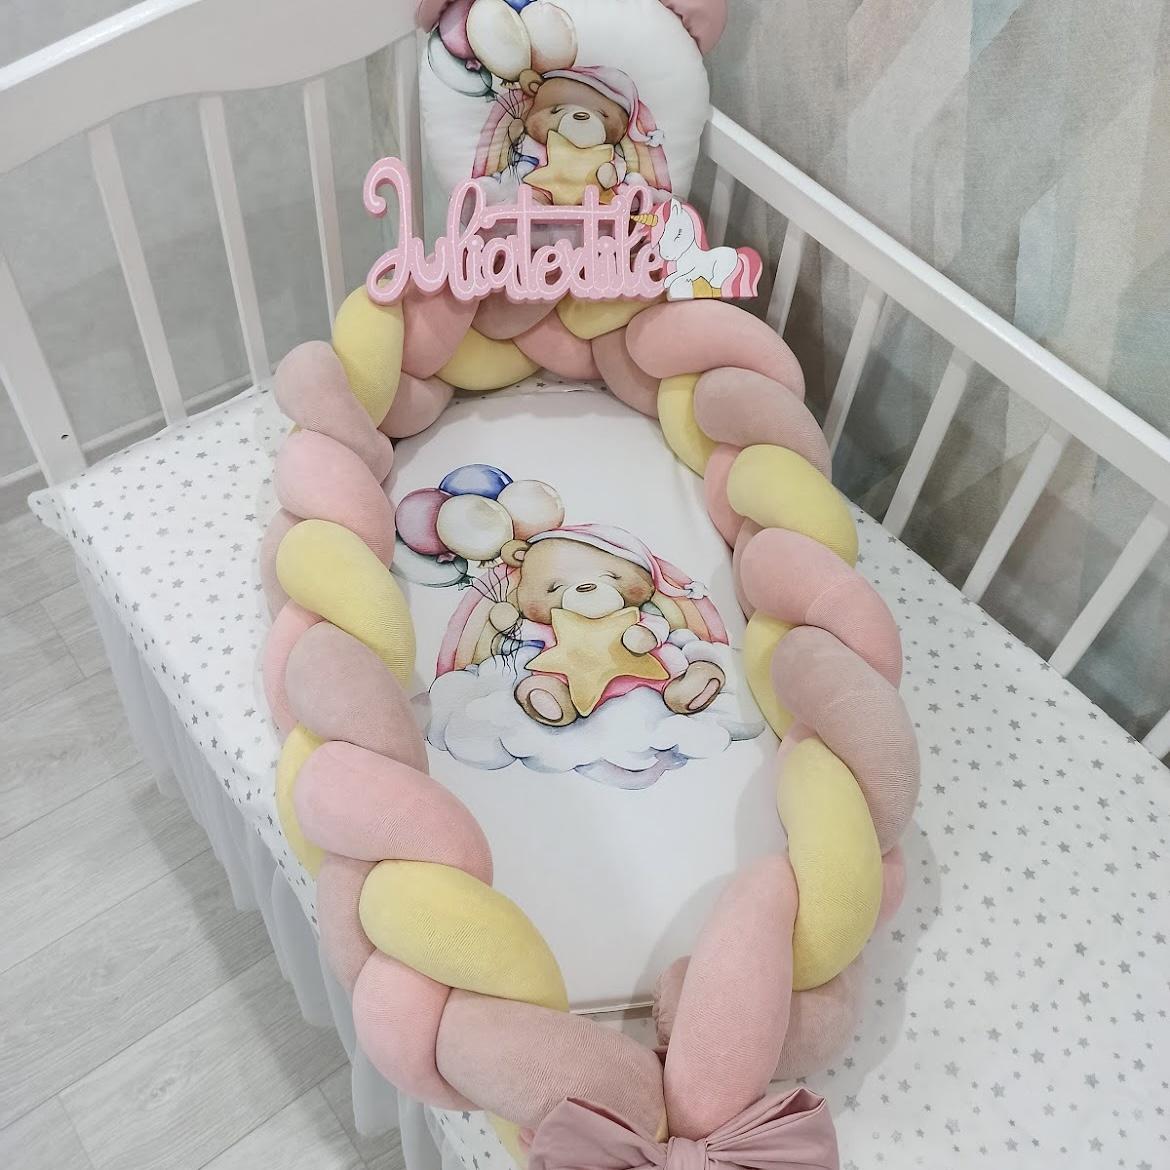 Braided reducer with teddy bear print and pink cream balloons